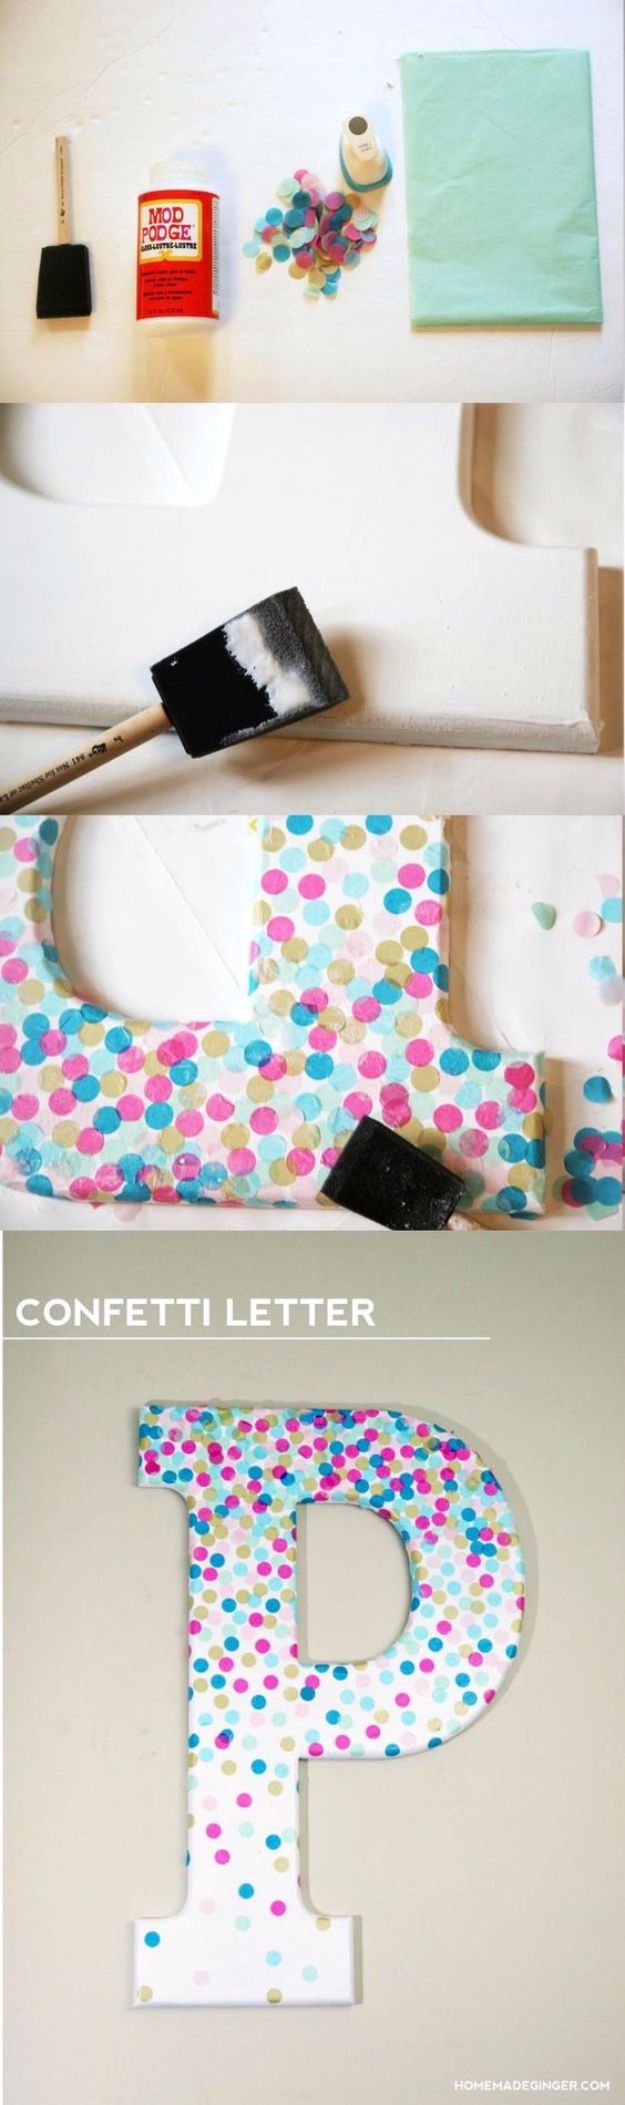 Mod Podge Crafts - Confetti Letters - DIY Modge Podge Ideas On Wood, Glass, Canvases, Fabric, Paper and Mason Jars - How To Make Pictures, Home Decor, Easy Craft Ideas and DIY Wall Art for Beginners - Cute, Cheap Crafty Homemade Gifts for Christmas and Birthday Presents 